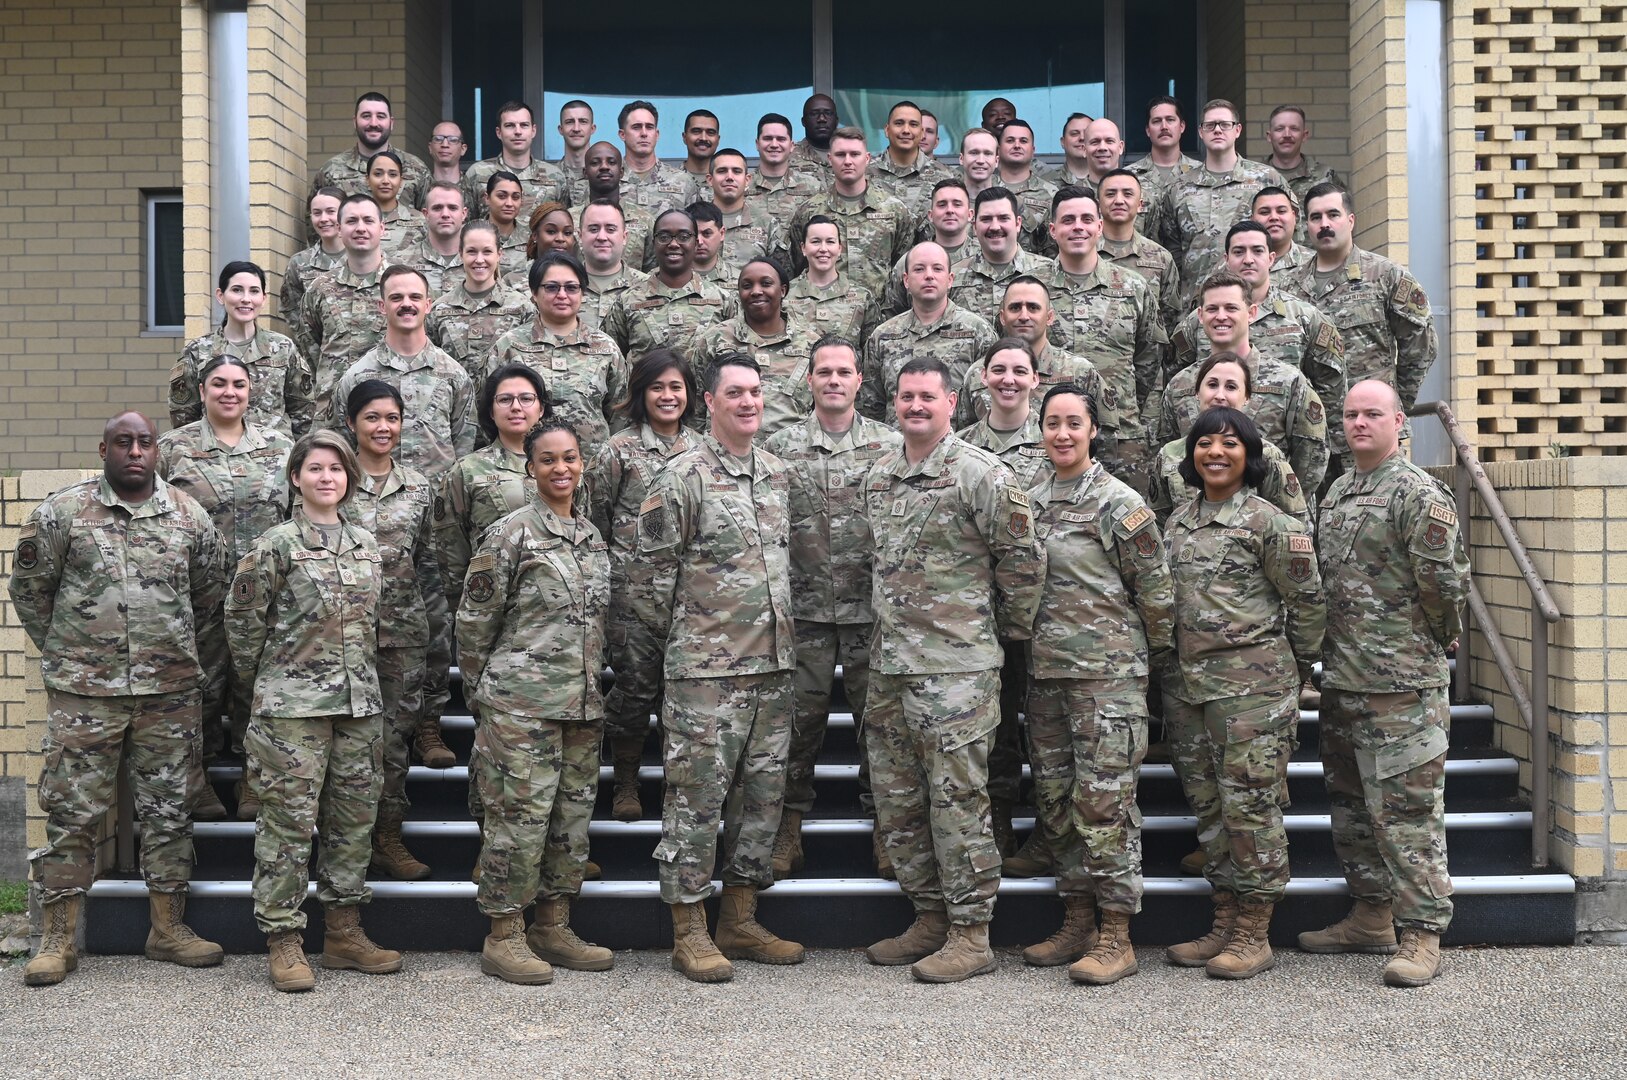 Col. Richard Erredge, commander of the 960th Cyberspace Wing, Chief Master Sgt. Christopher Howard, and 960 CW First Sergeants pose for a photo alongside the student airmen of the symposium at Joint Base San Antonio-Lackland, Texas on March 27, 2023. (U.S. Air Force photo by 2nd Lt. Alex Dieguez)